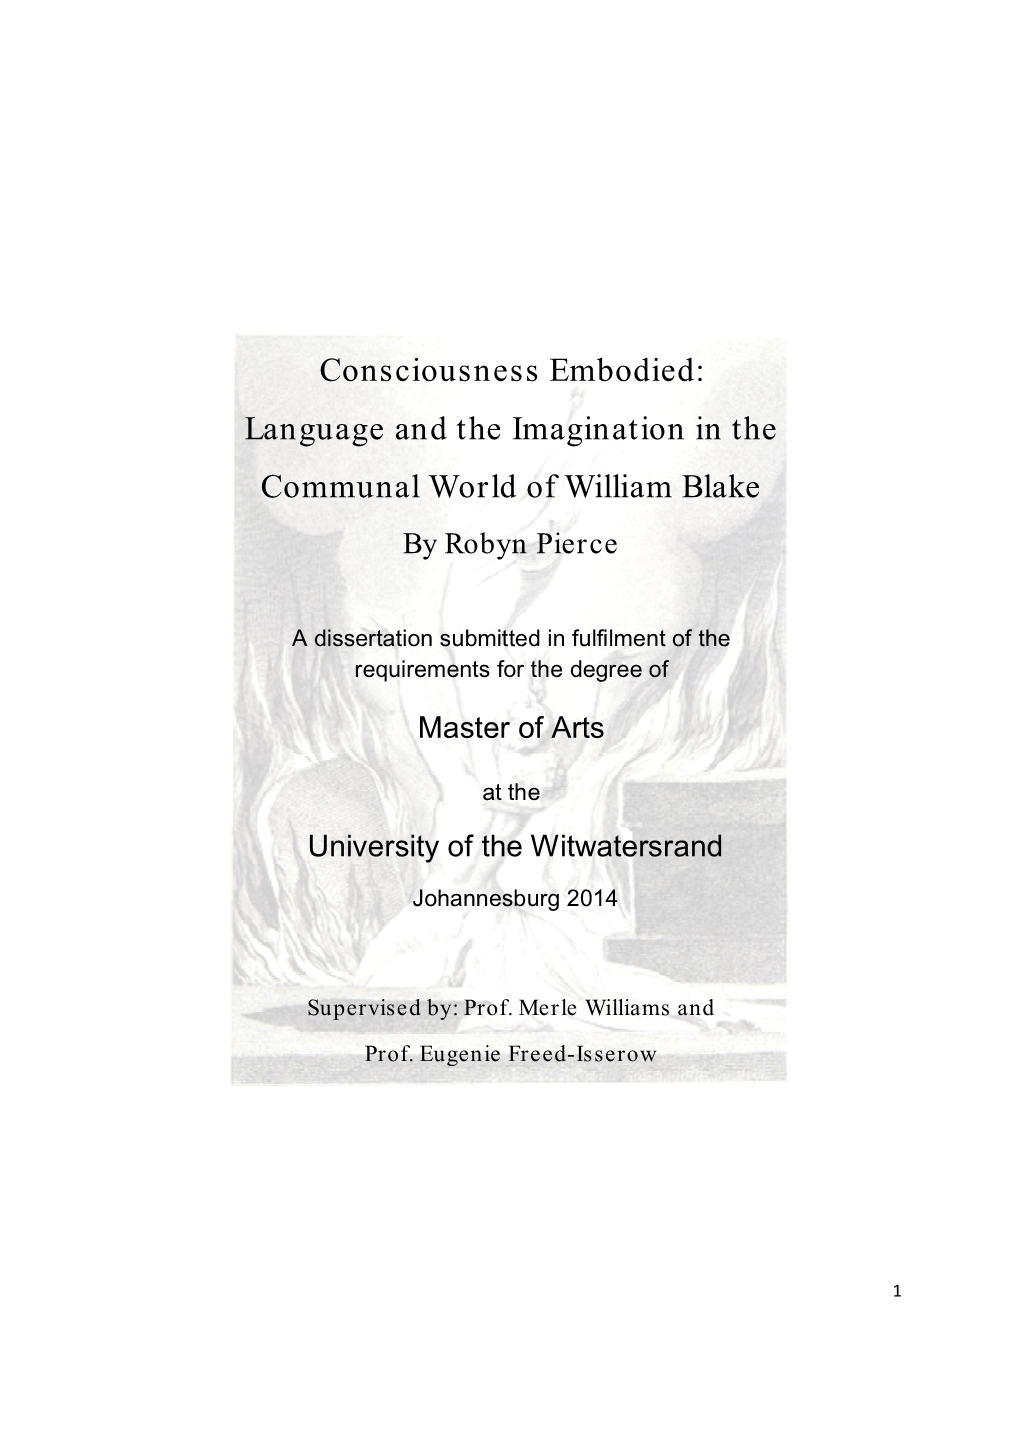 Language and the Imagination in the Communal World of William Blake by Robyn Pierce